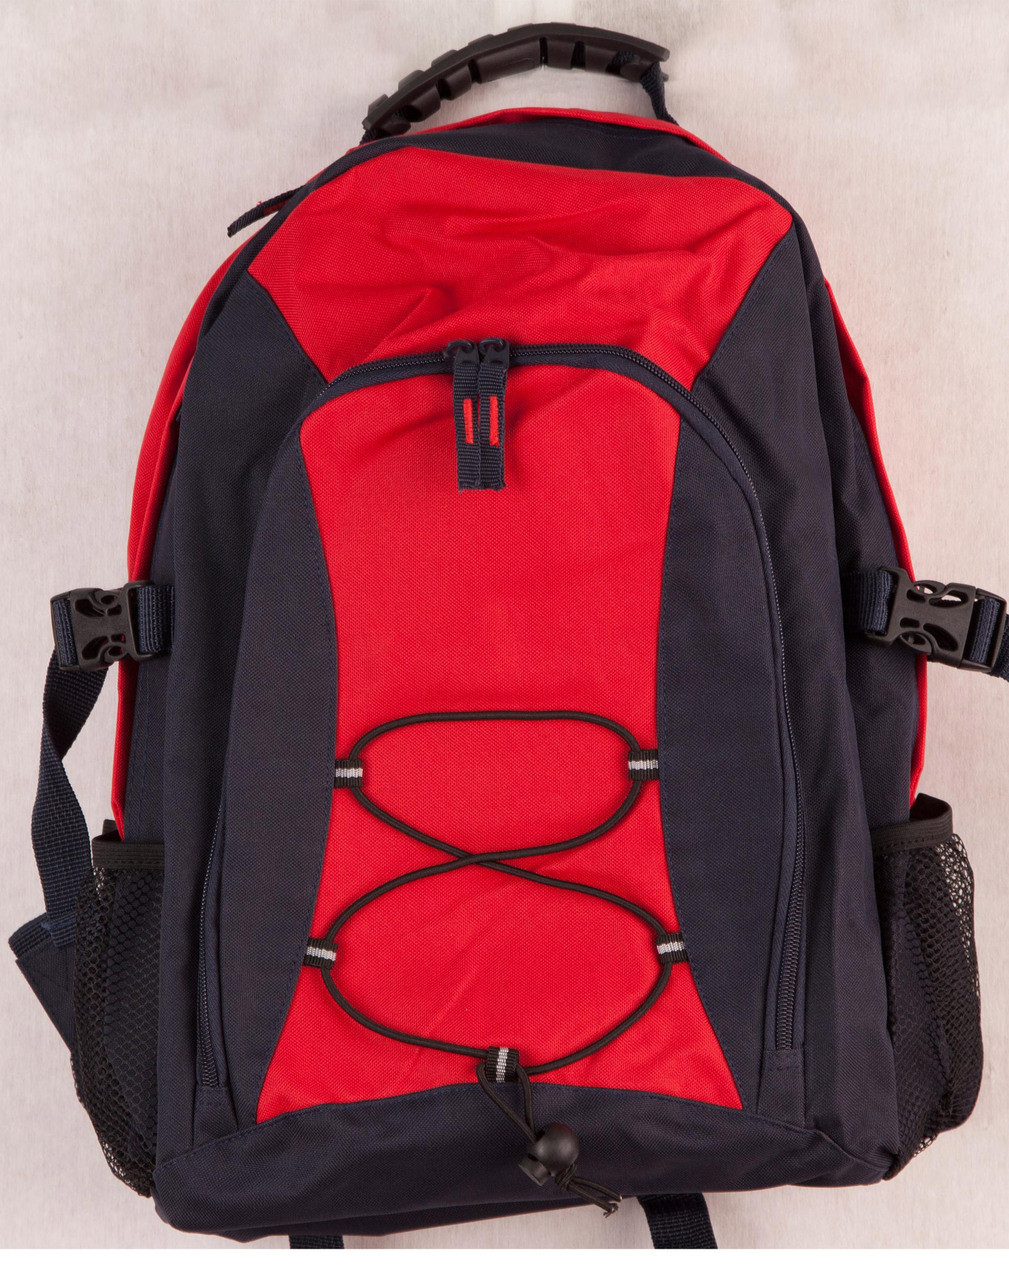 SMARTS | padded backpack with bungee cord | wholesale plain bags ...